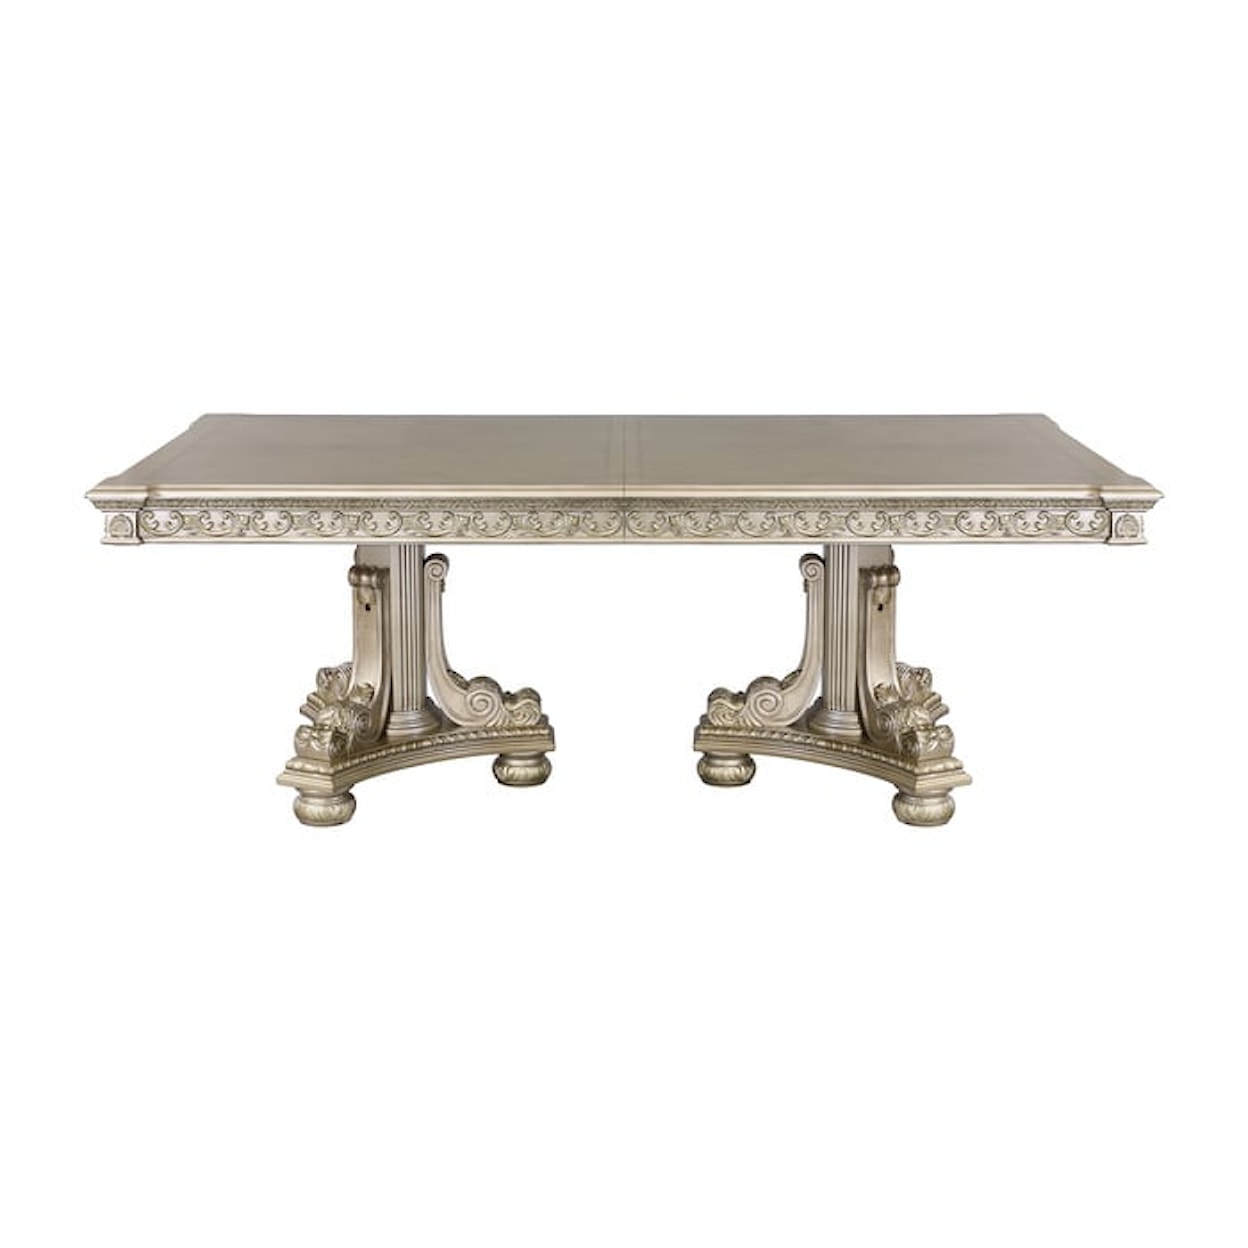 Homelegance Catalonia Dining Table